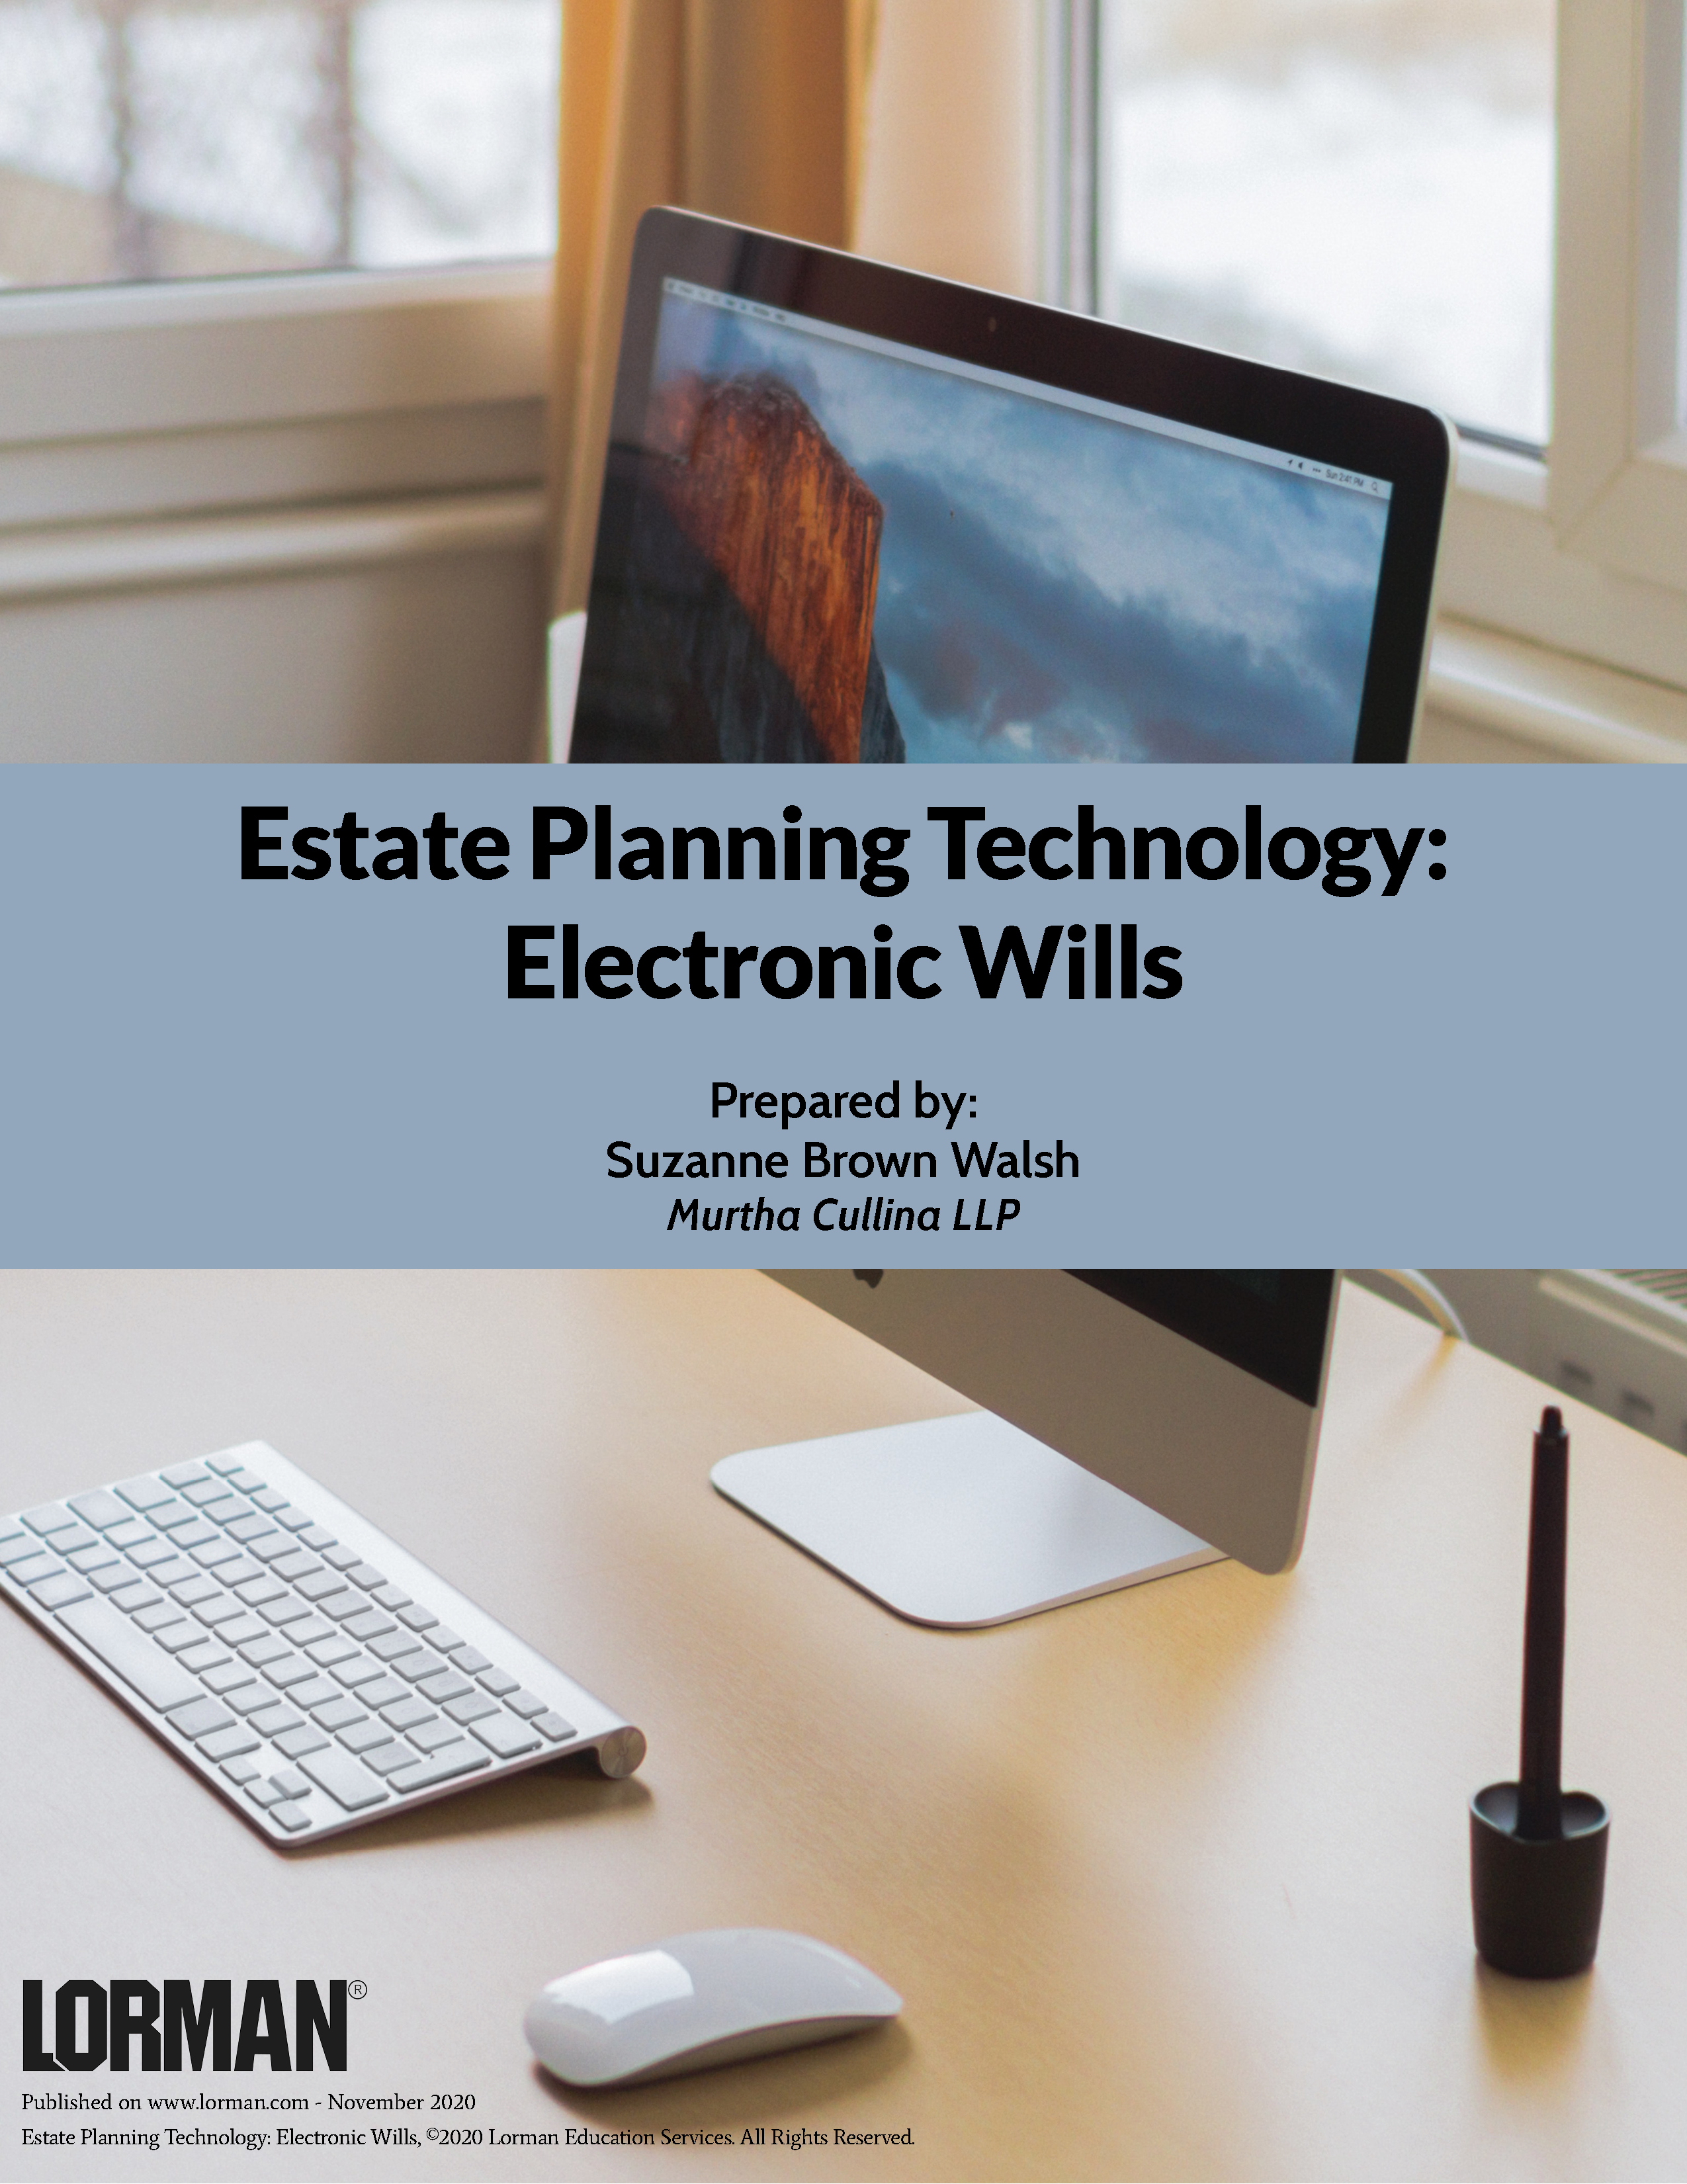 Estate Planning Technology: Electronic Wills